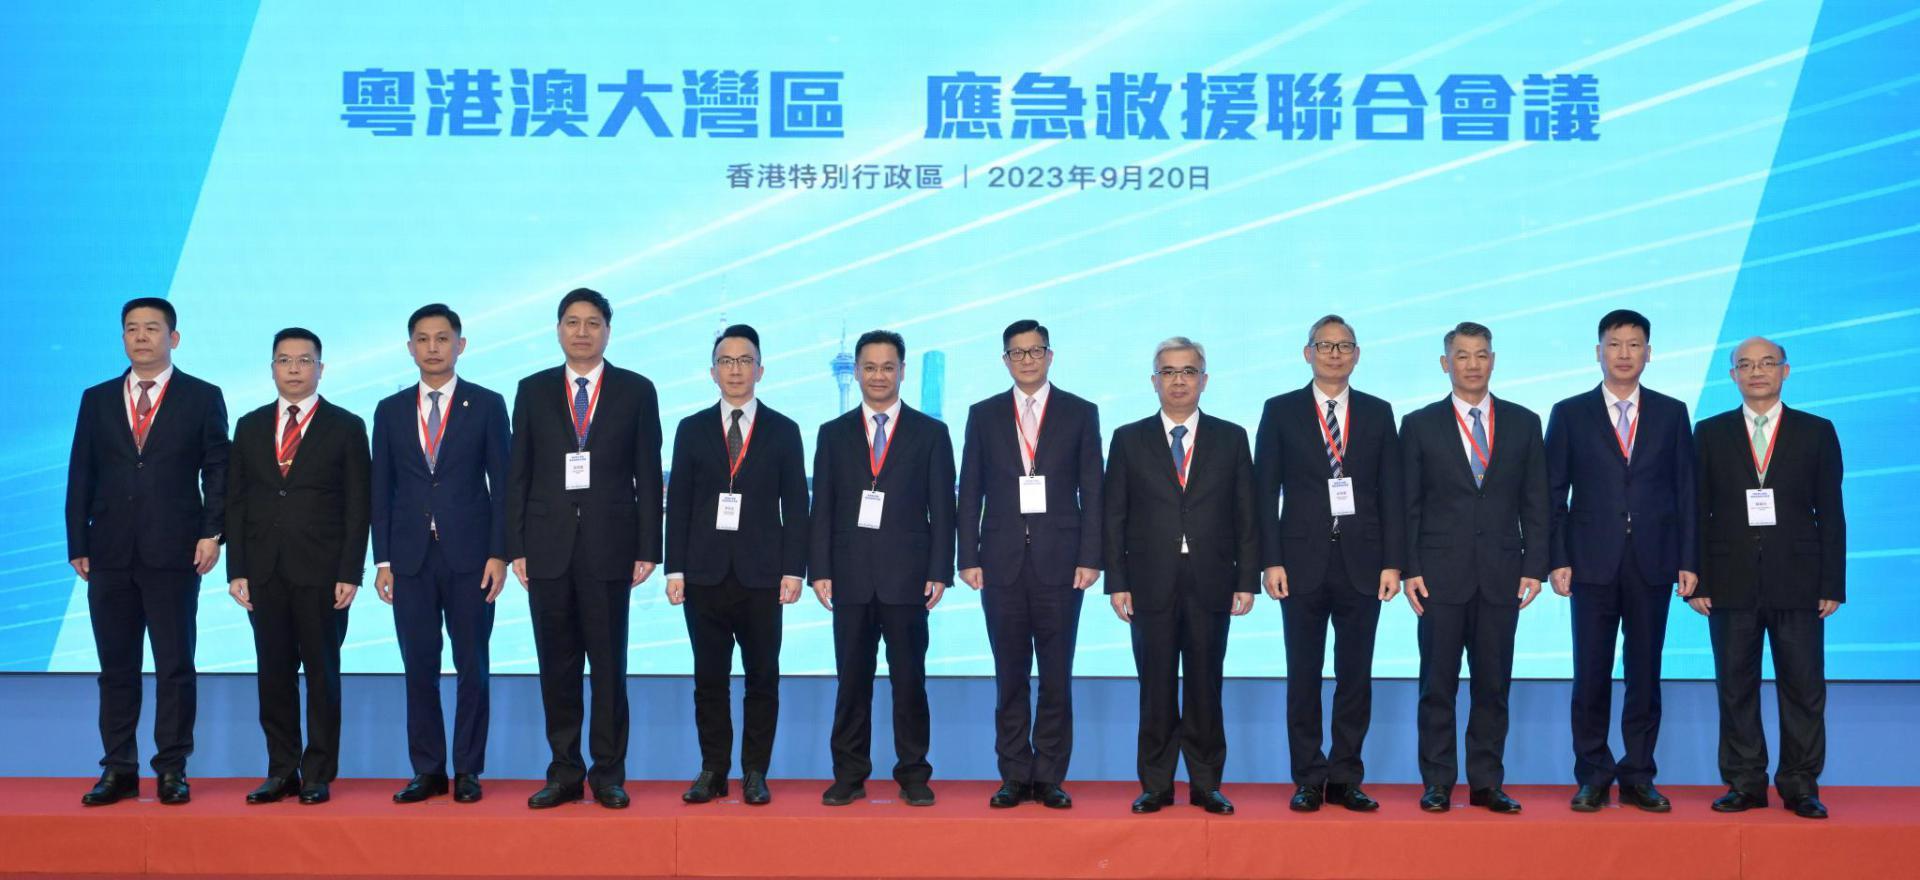 The Guangdong-Hong Kong-Macao Greater Bay Area (GBA) Emergency Response Joint Meeting was held in Hong Kong this afternoon (September 20). Photo shows the Secretary for Security, Mr Tang Ping-keung (seventh left), and (from third left) the Director of Fire Services, Mr Andy Yeung; the Commander of the Guangdong Fire and Rescue Brigade, Mr Zhang Mingcan; the Permanent Secretary for Security, Mr Patrick Li; the Director of the Department of Emergency Management of Guangdong Province, Mr Wang Zaihua; the Secretary for Security of the Government of the Macao Special Administrative Region , Mr Wong Sio-chak; the Under Secretary for Security, Mr Michael Cheuk, and senior officials participating in the meeting.